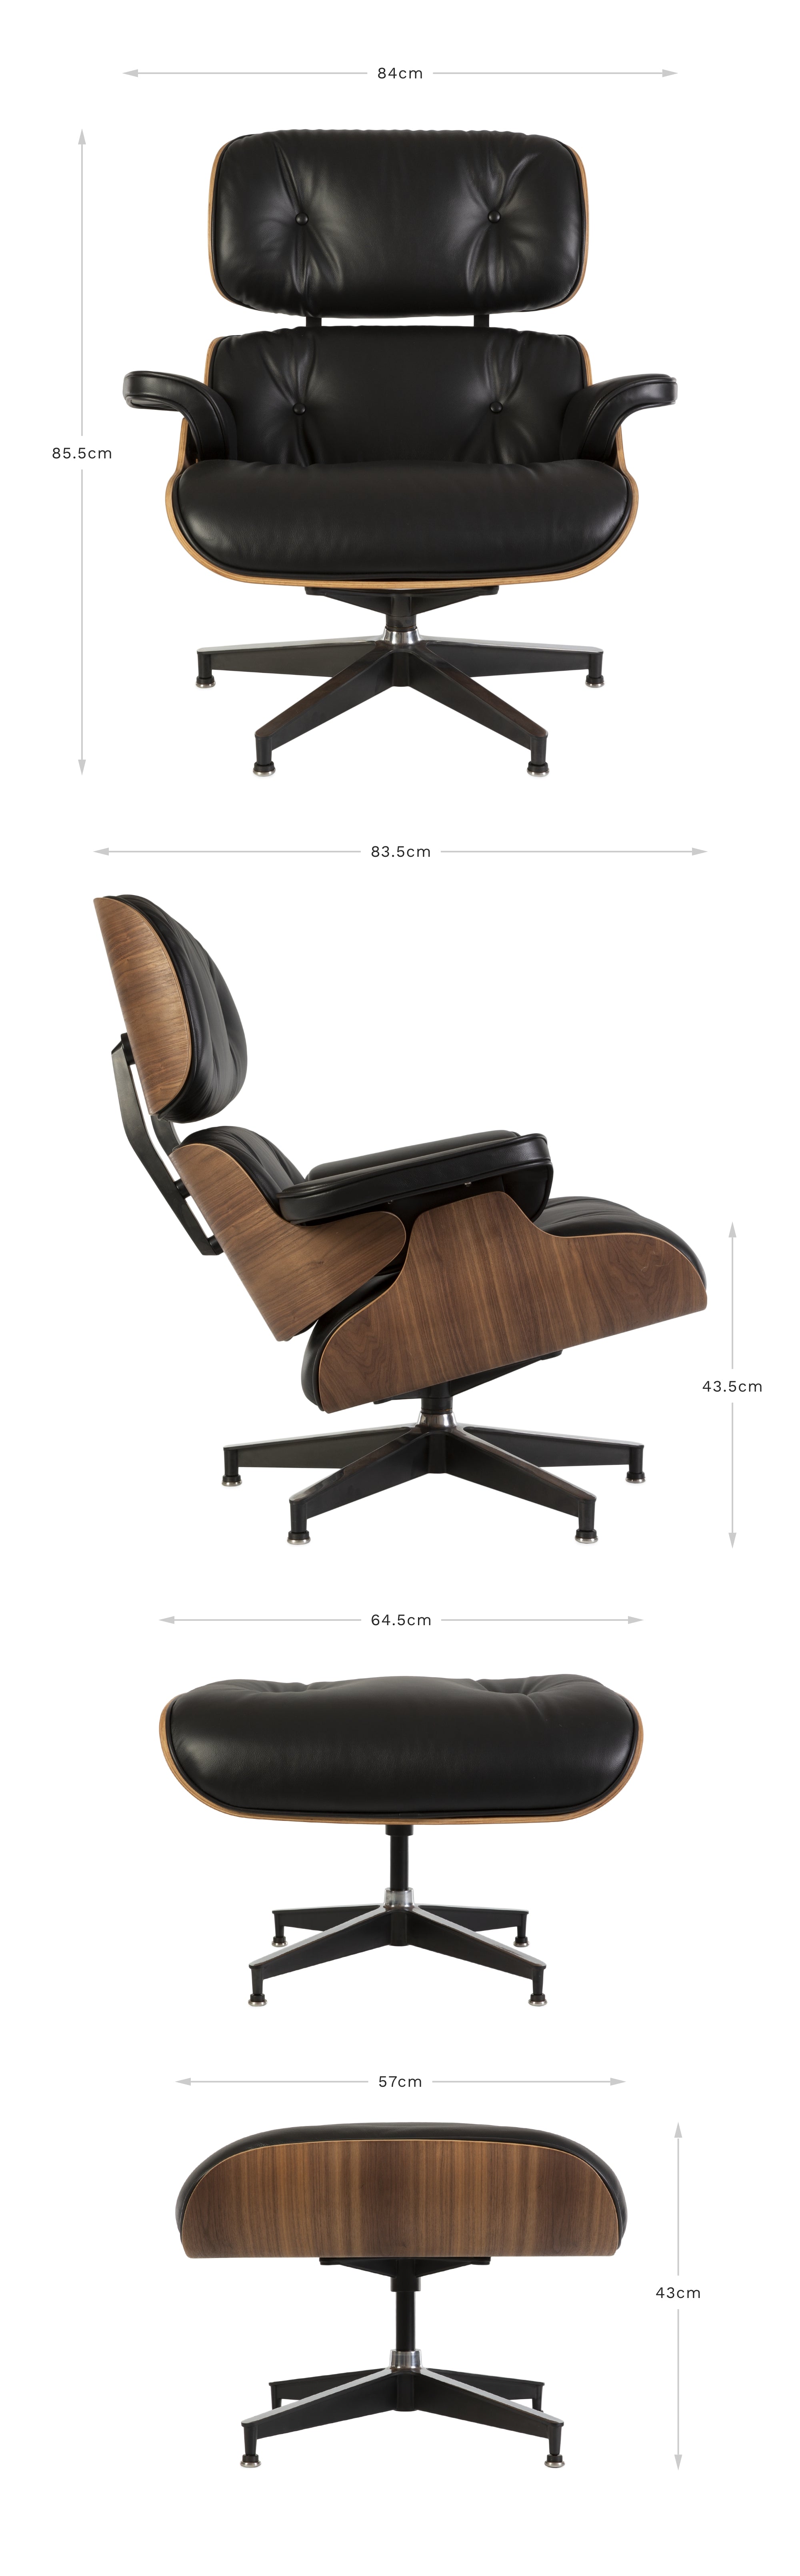 View of front and side of the black and walnut Eames Lounge Chair and Ottoman on a white background displaying the dimensions